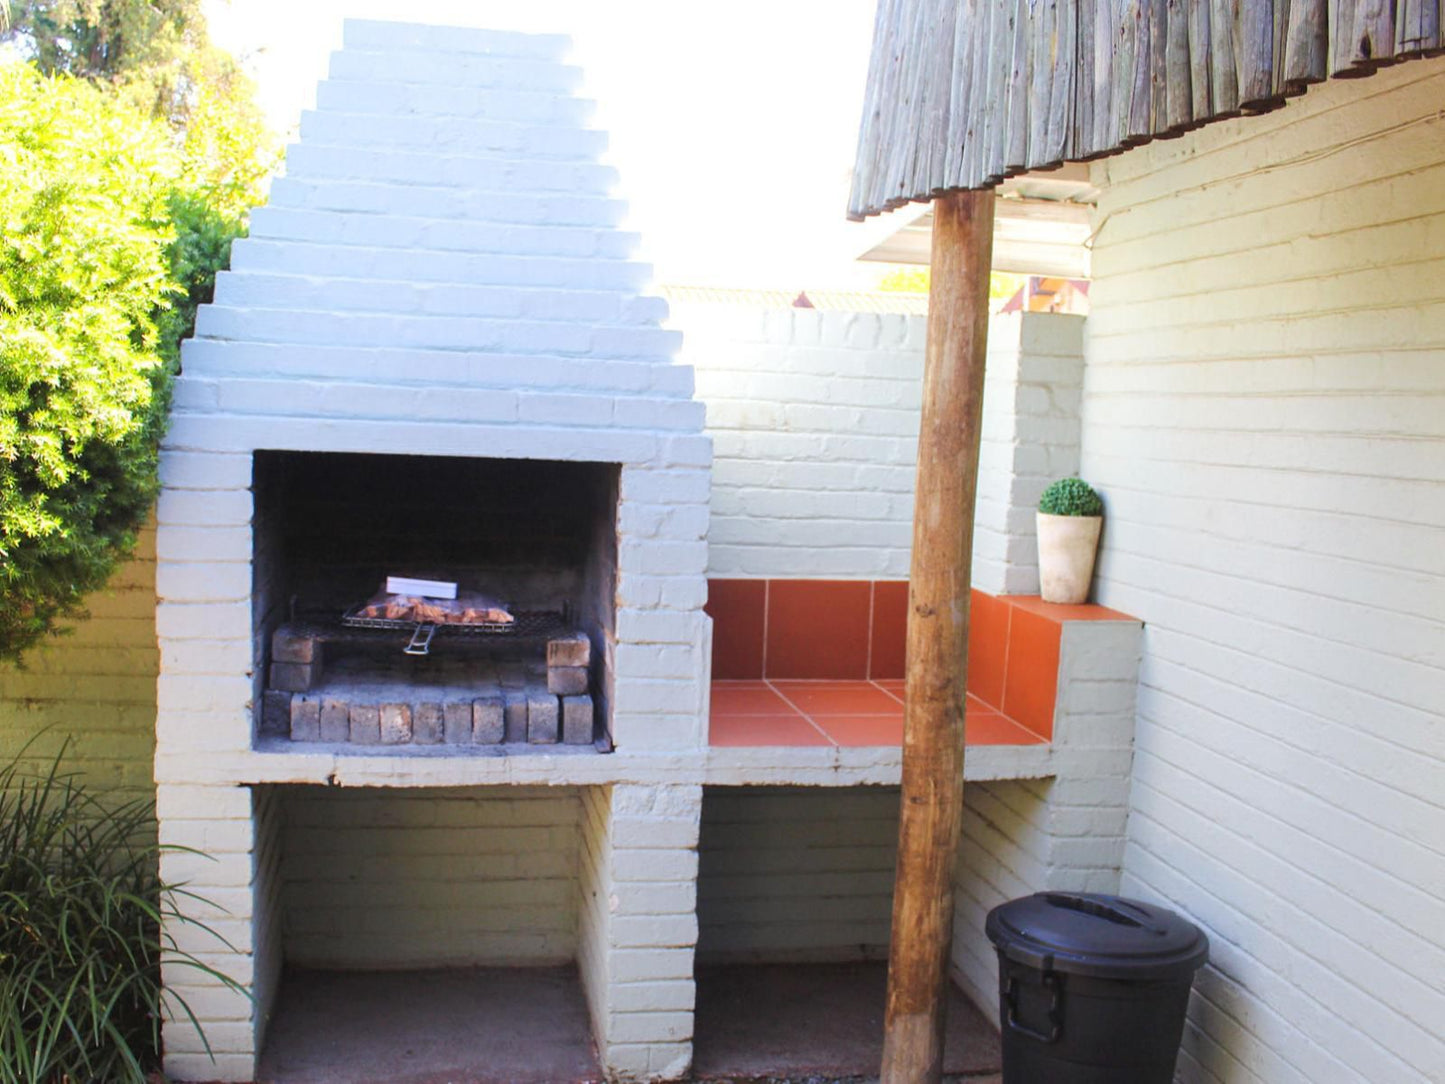 Amaziah Guest House Kuruman Northern Cape South Africa Cabin, Building, Architecture, Fire, Nature, Fireplace